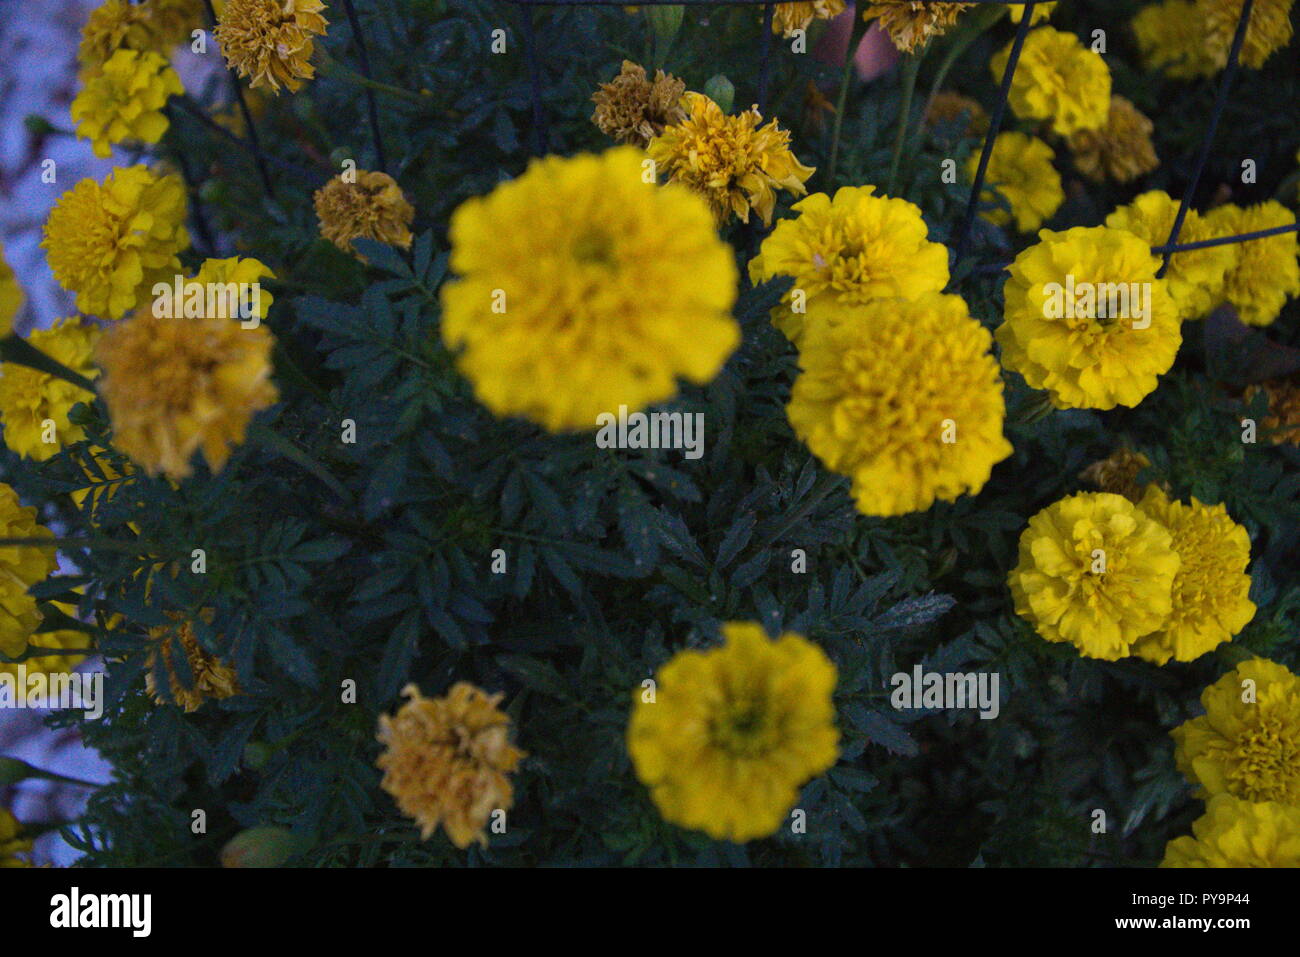 Blurry and focused yellow marigold flowers and their leaves. Stock Photo